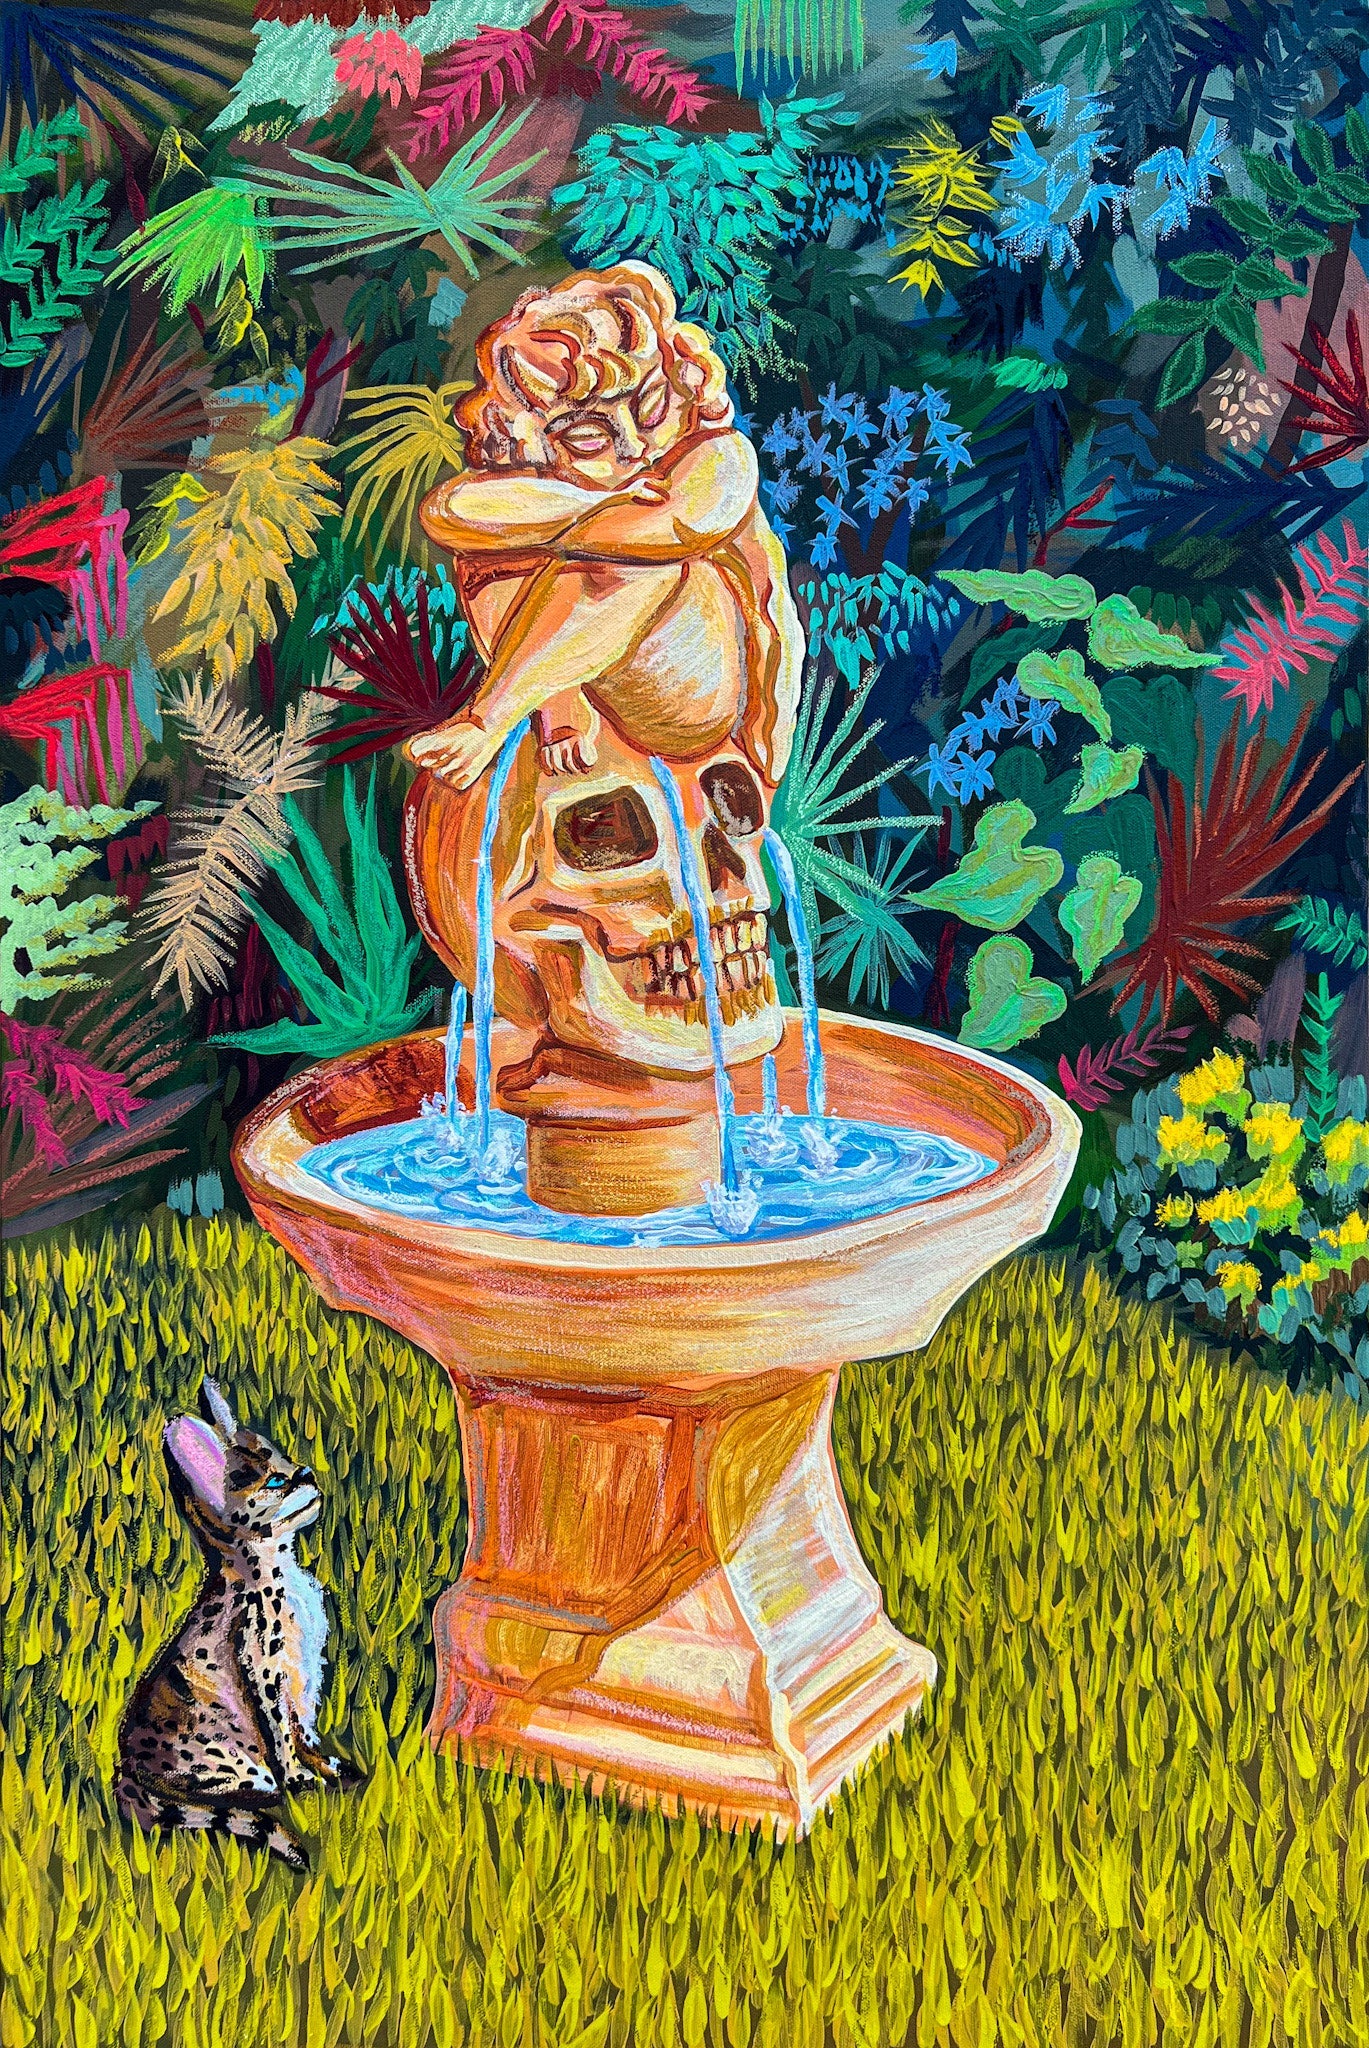 Fountain and baby ocelot by Brittany Fanning